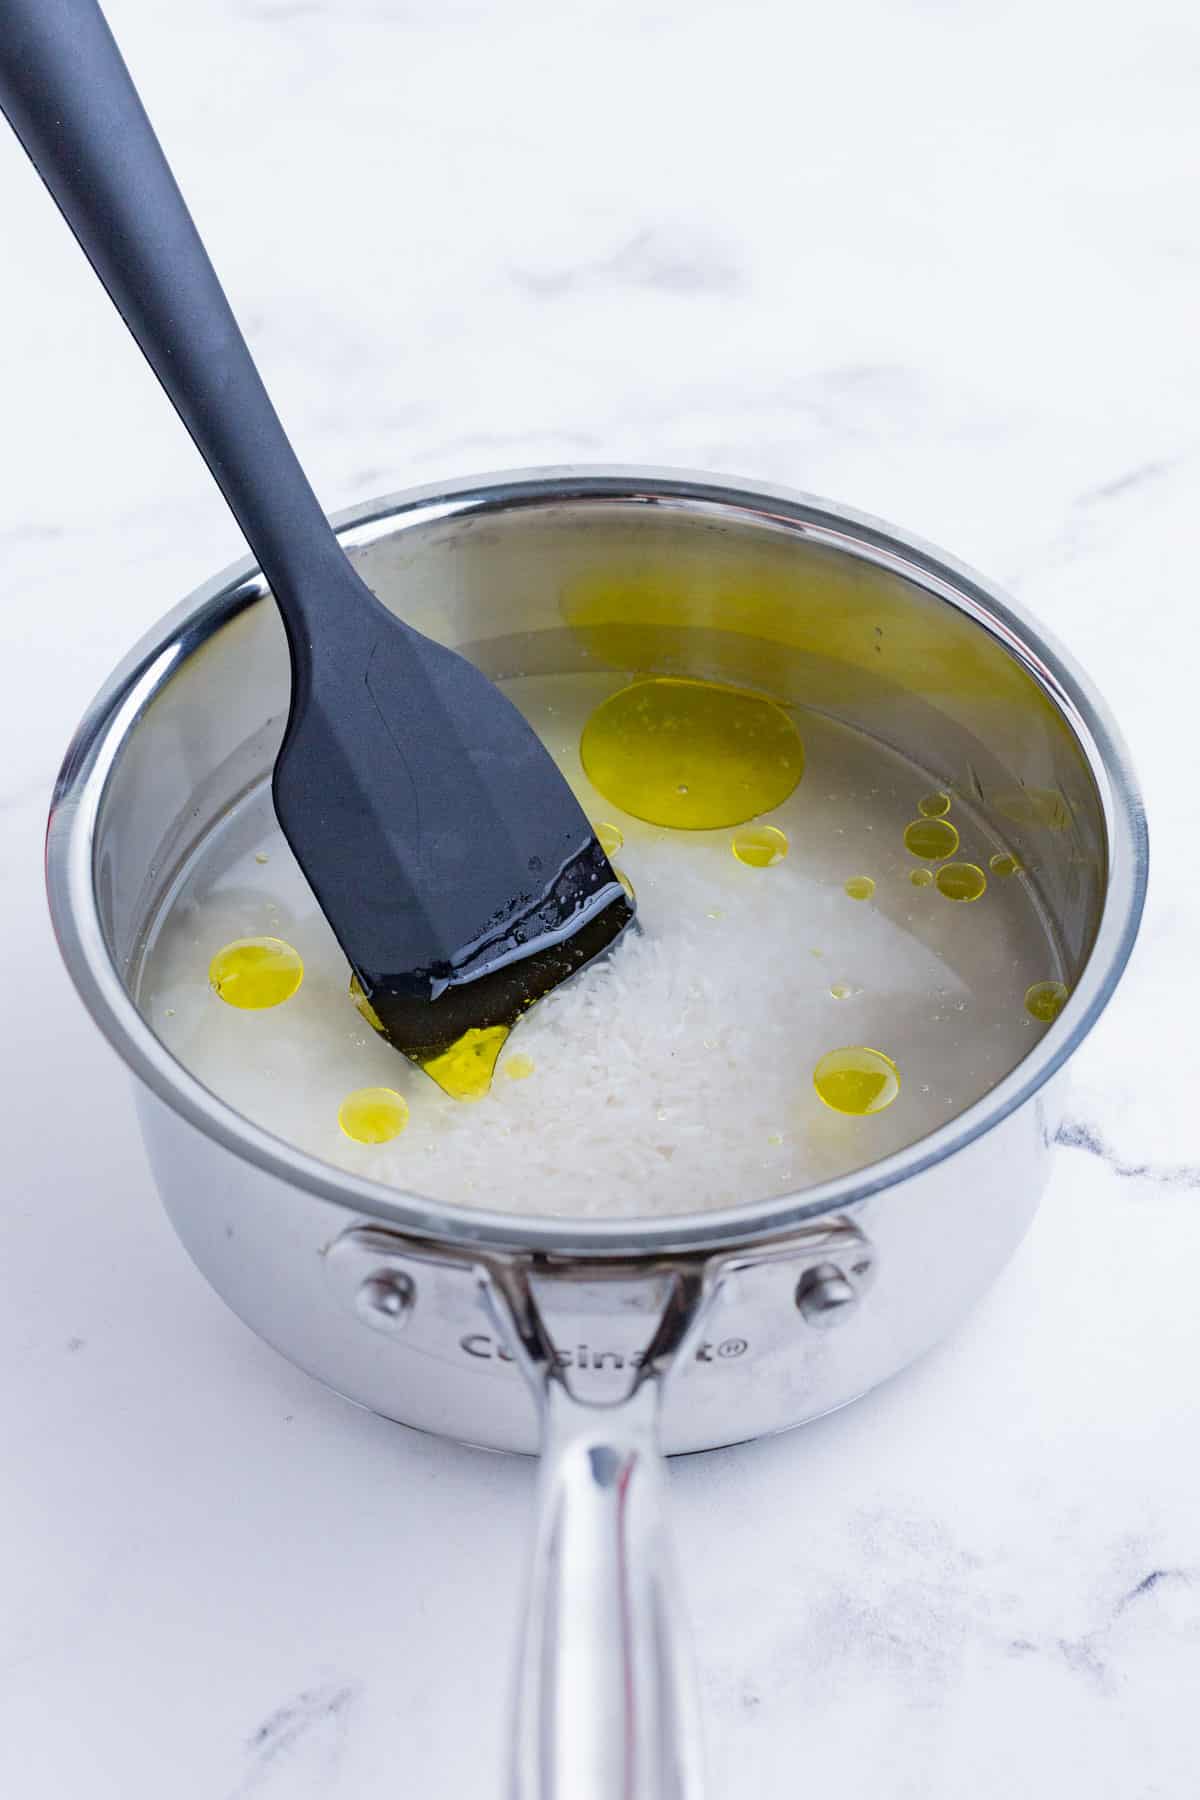 Rice, water, oil, and salt are added to a pot to cook.